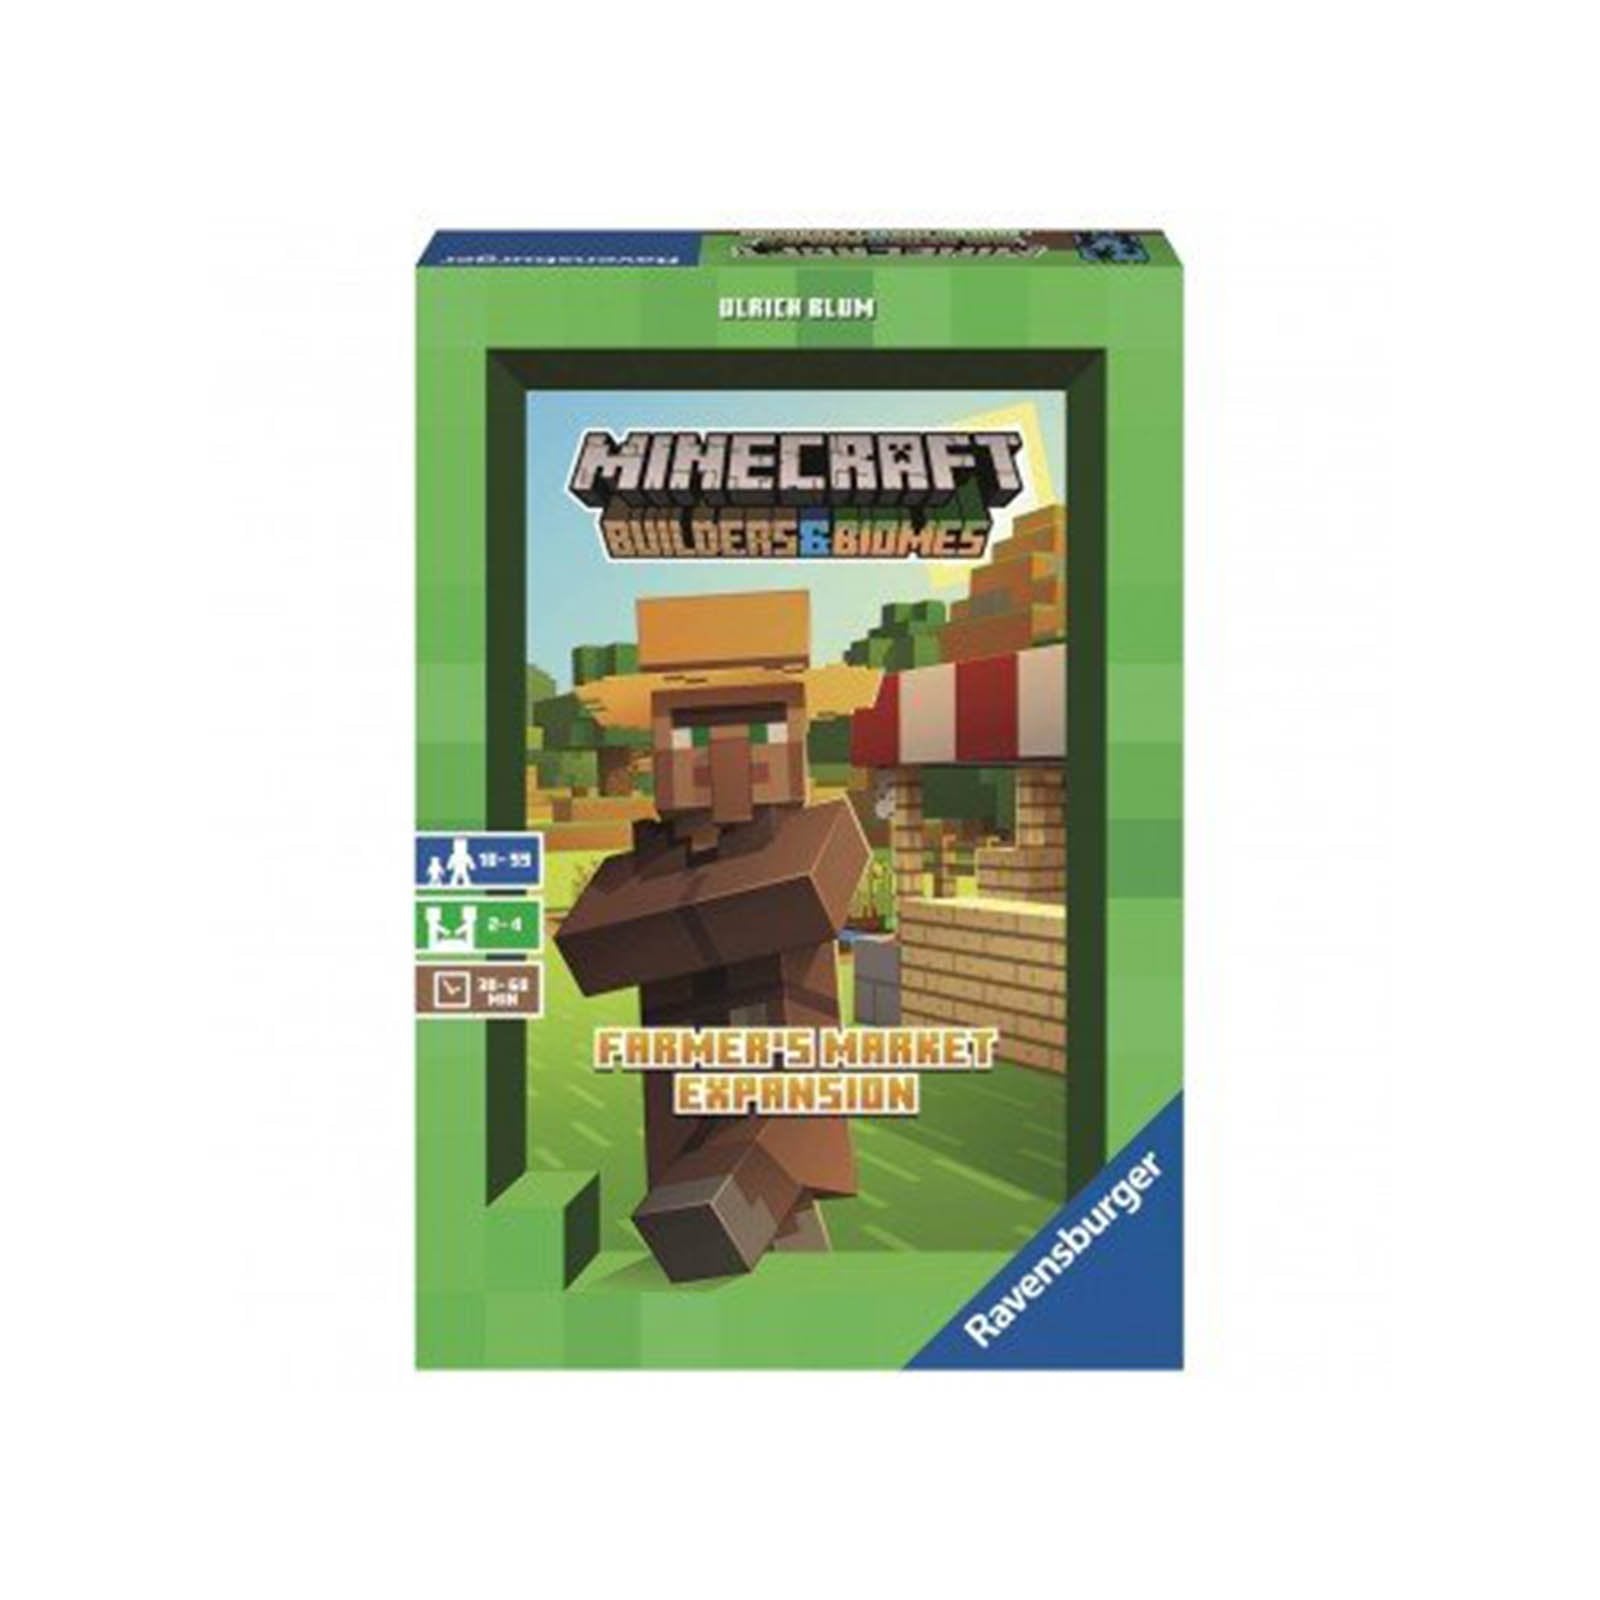 RBURG - MINECRAFT BUILDERS & BIOMES FARMER'S MARKET GAME EXPANSION